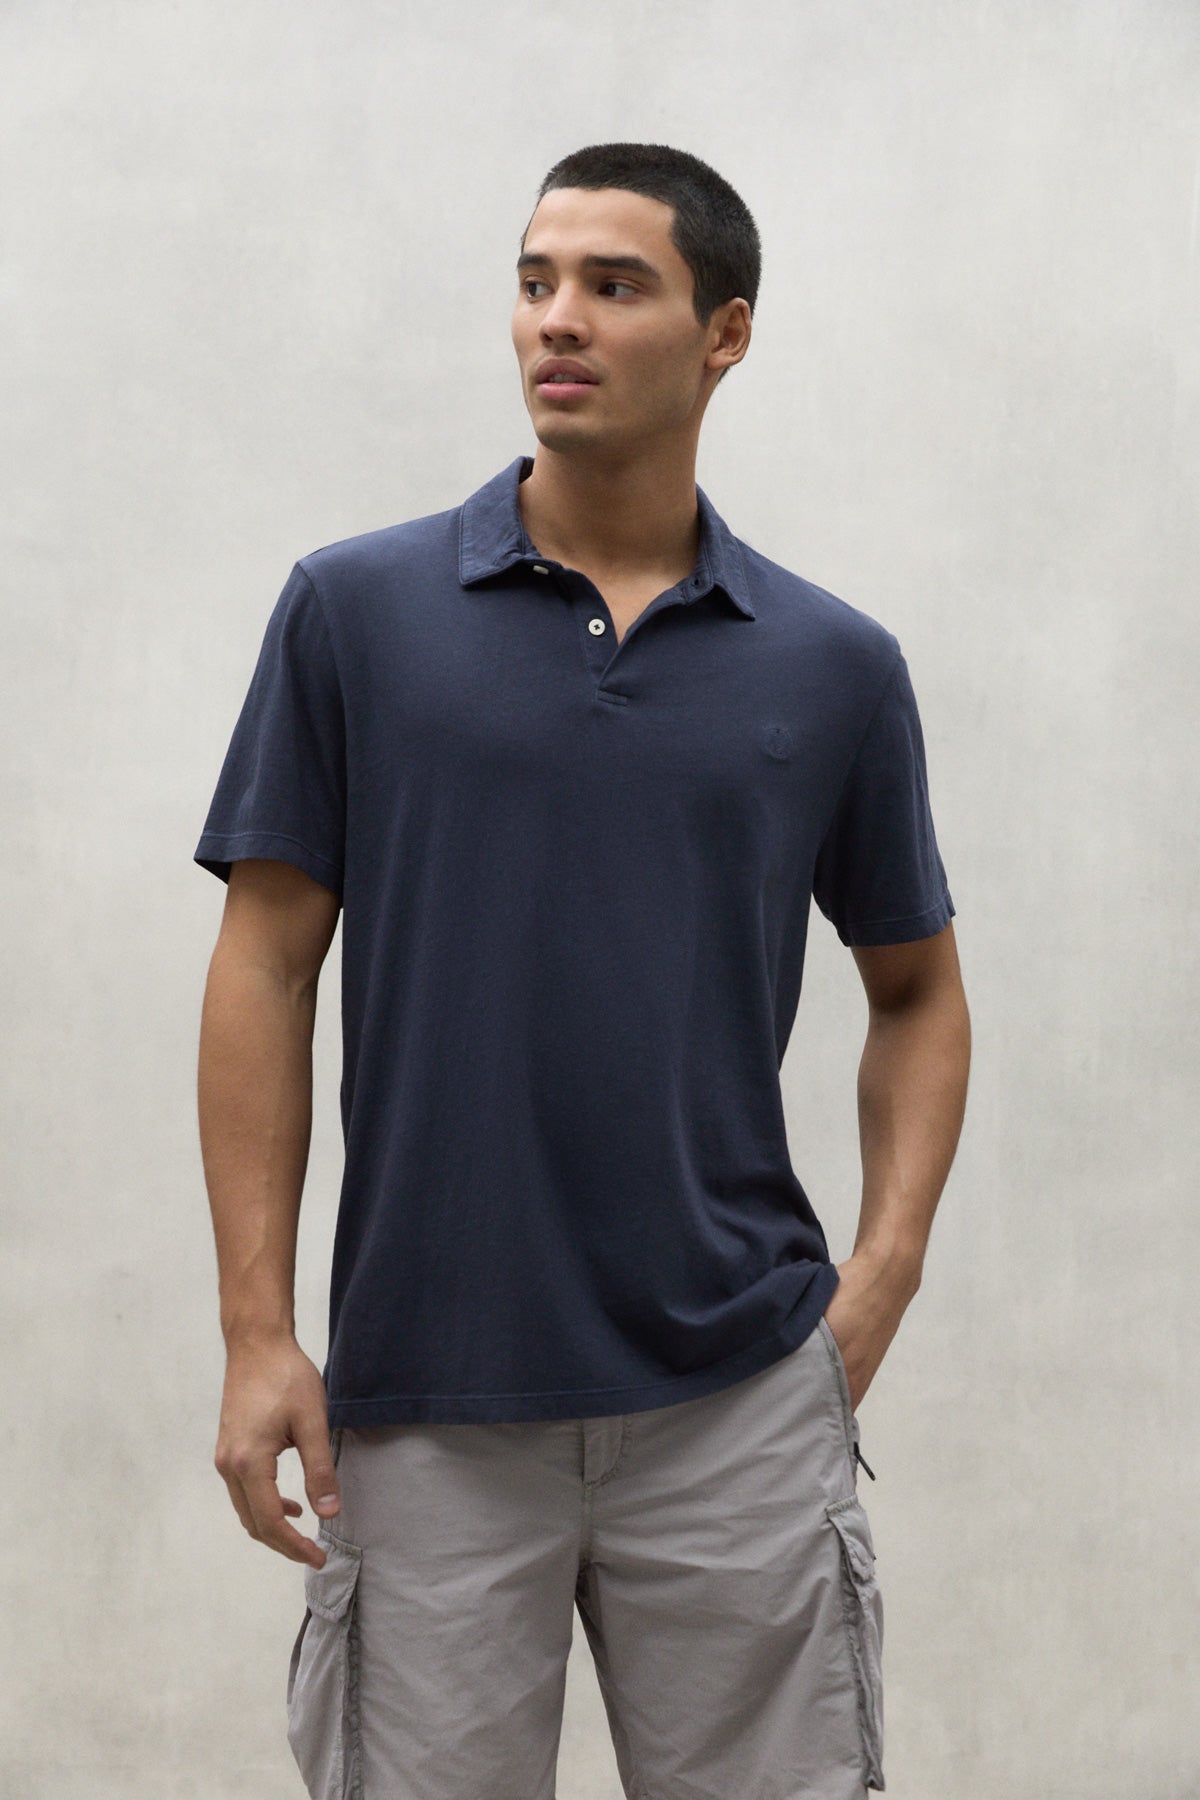 NAVY BLUE THEO JERSEY POLO SHIRT